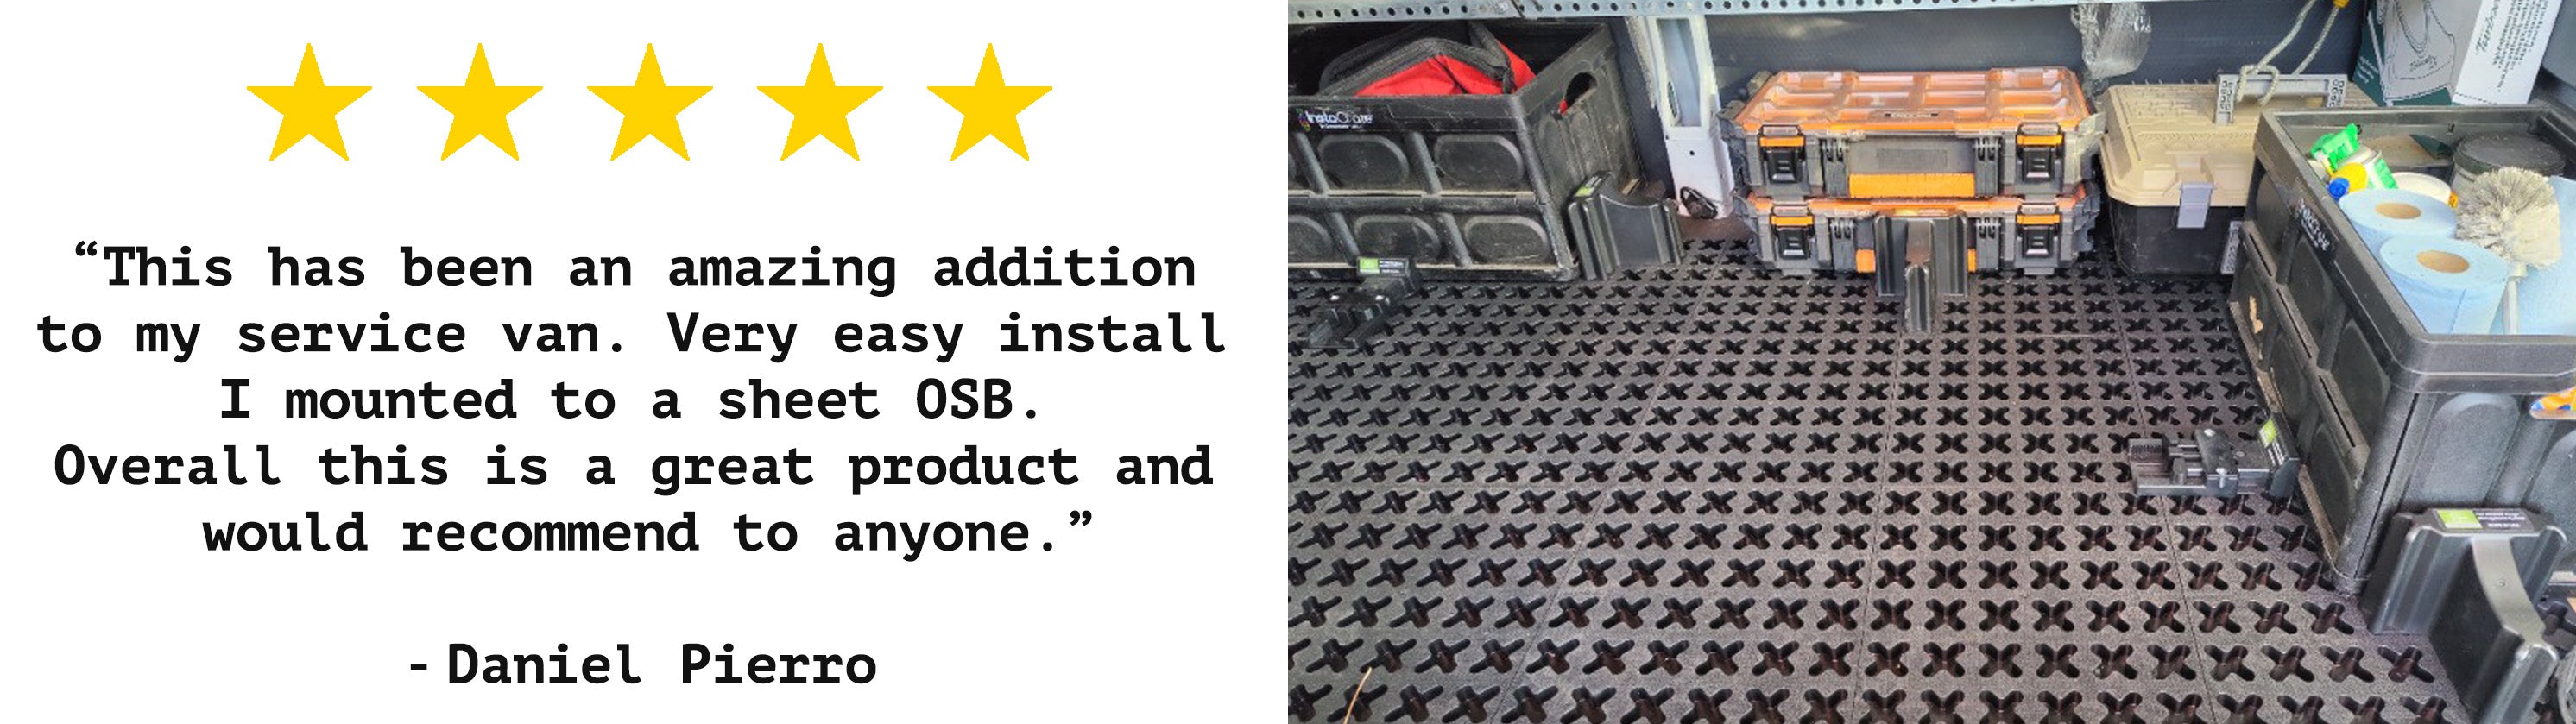 "This has been an amazing addition to my service van. Very easy install I mounted to a sheet of OSB. Overall this is a great product and would recommend to anyone." - Daniel Pierro